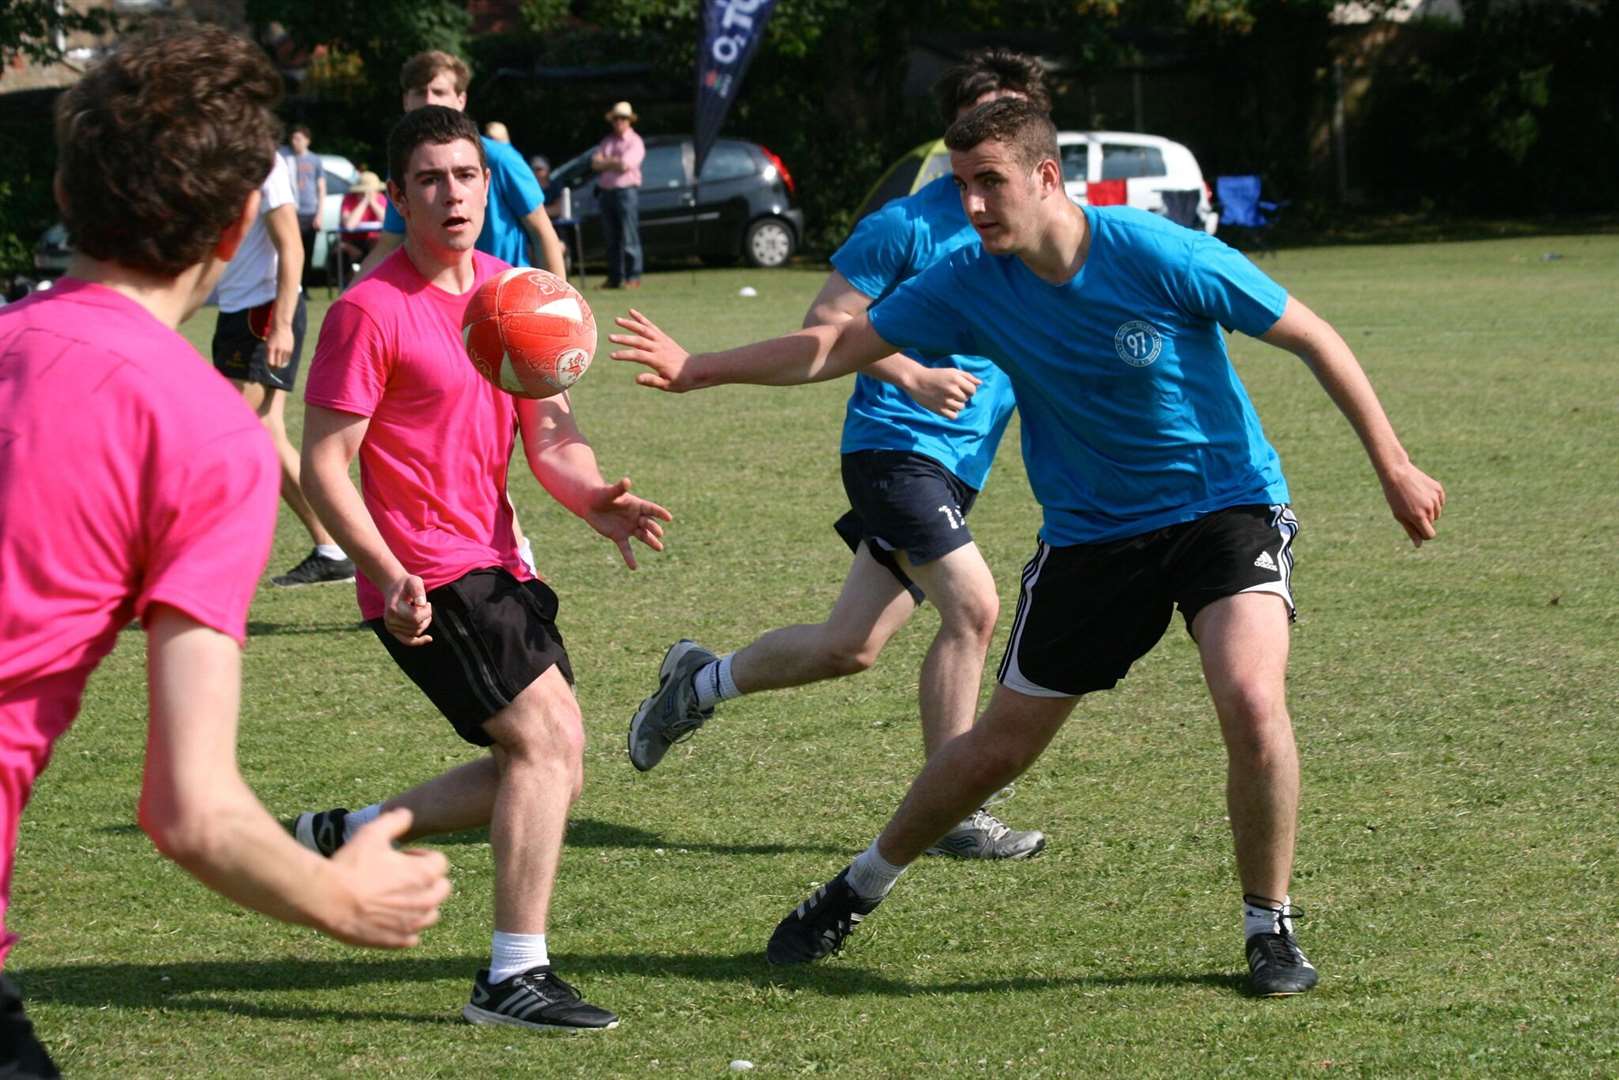 Sixth formers playing rugby for charity